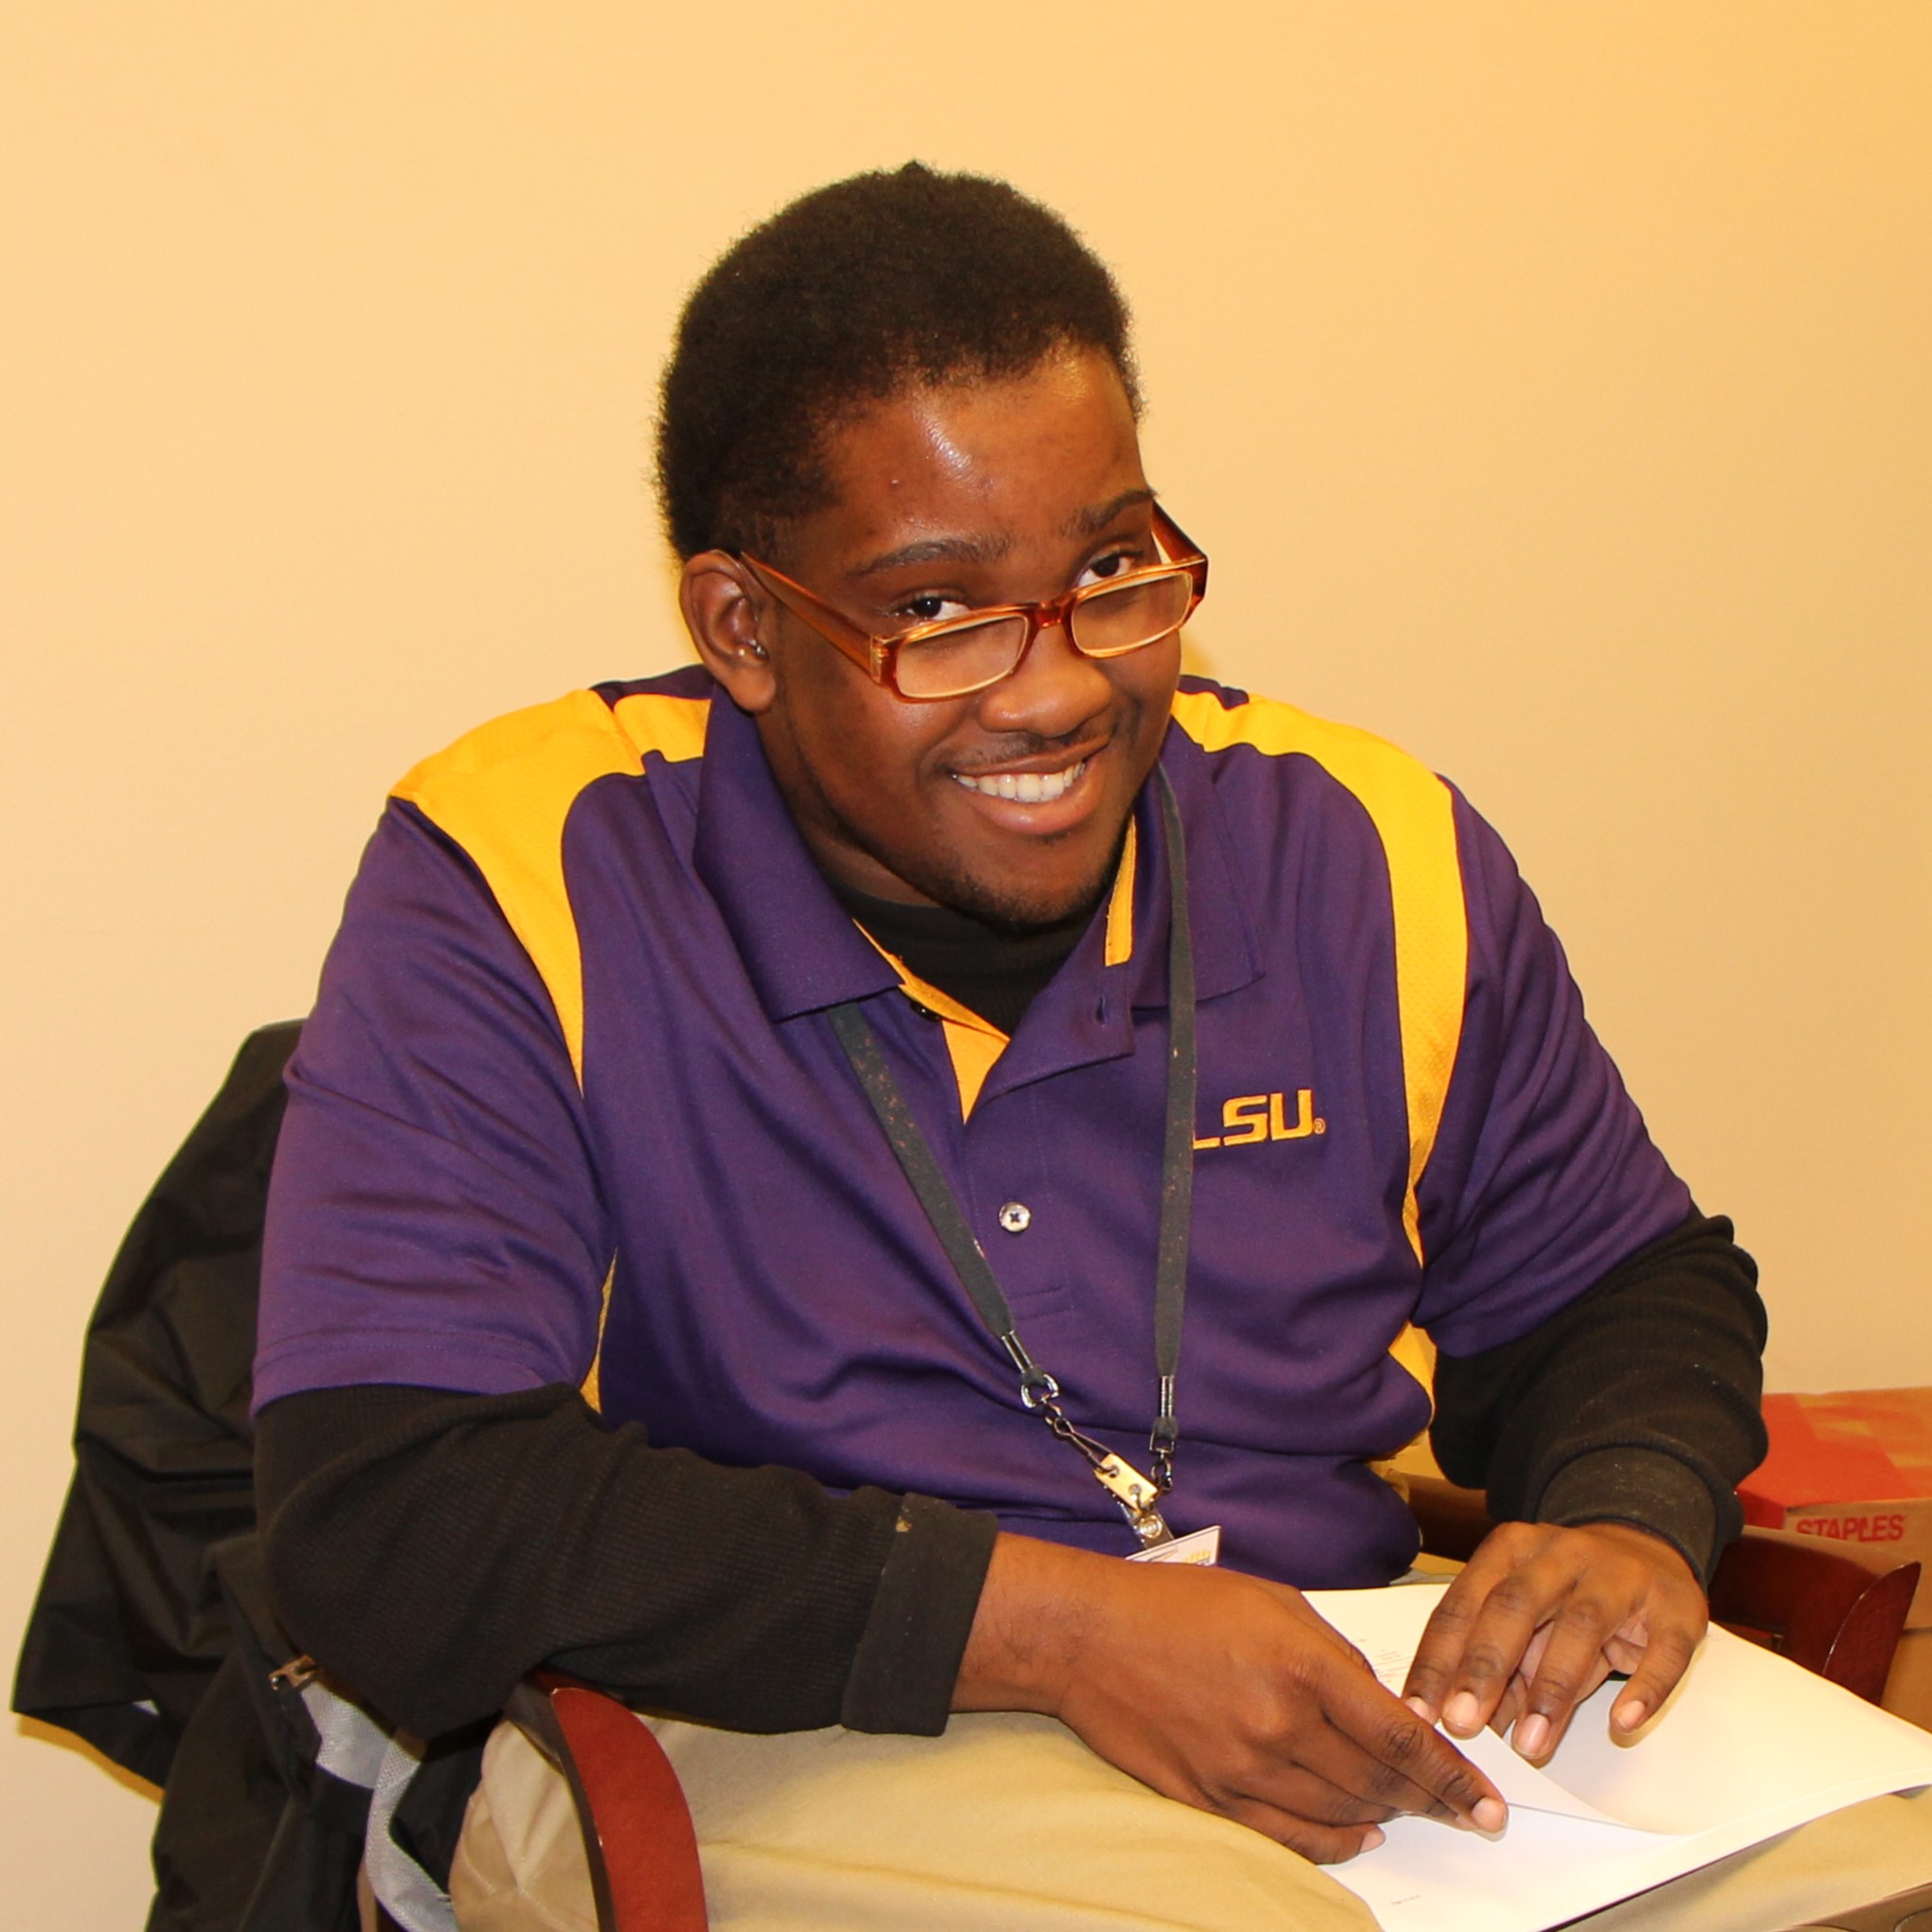 Young man wearing eyeglasses and a collared LSU shirt smiles while working in an office.